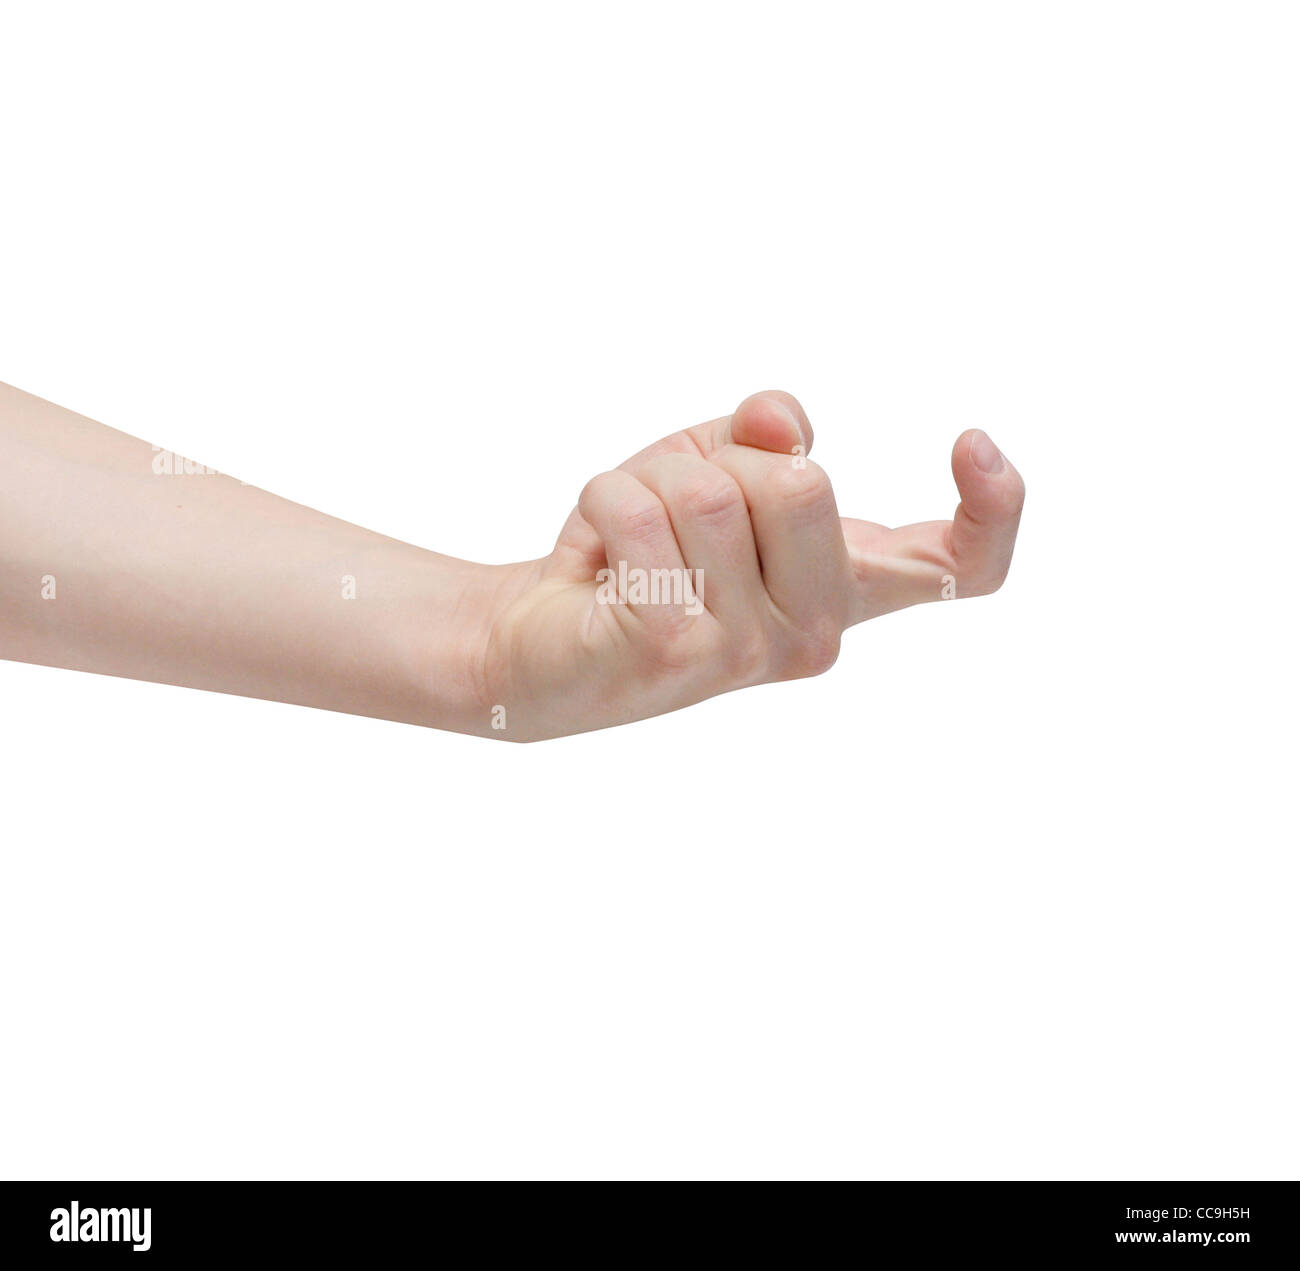 A hand luring you closer Stock Photo